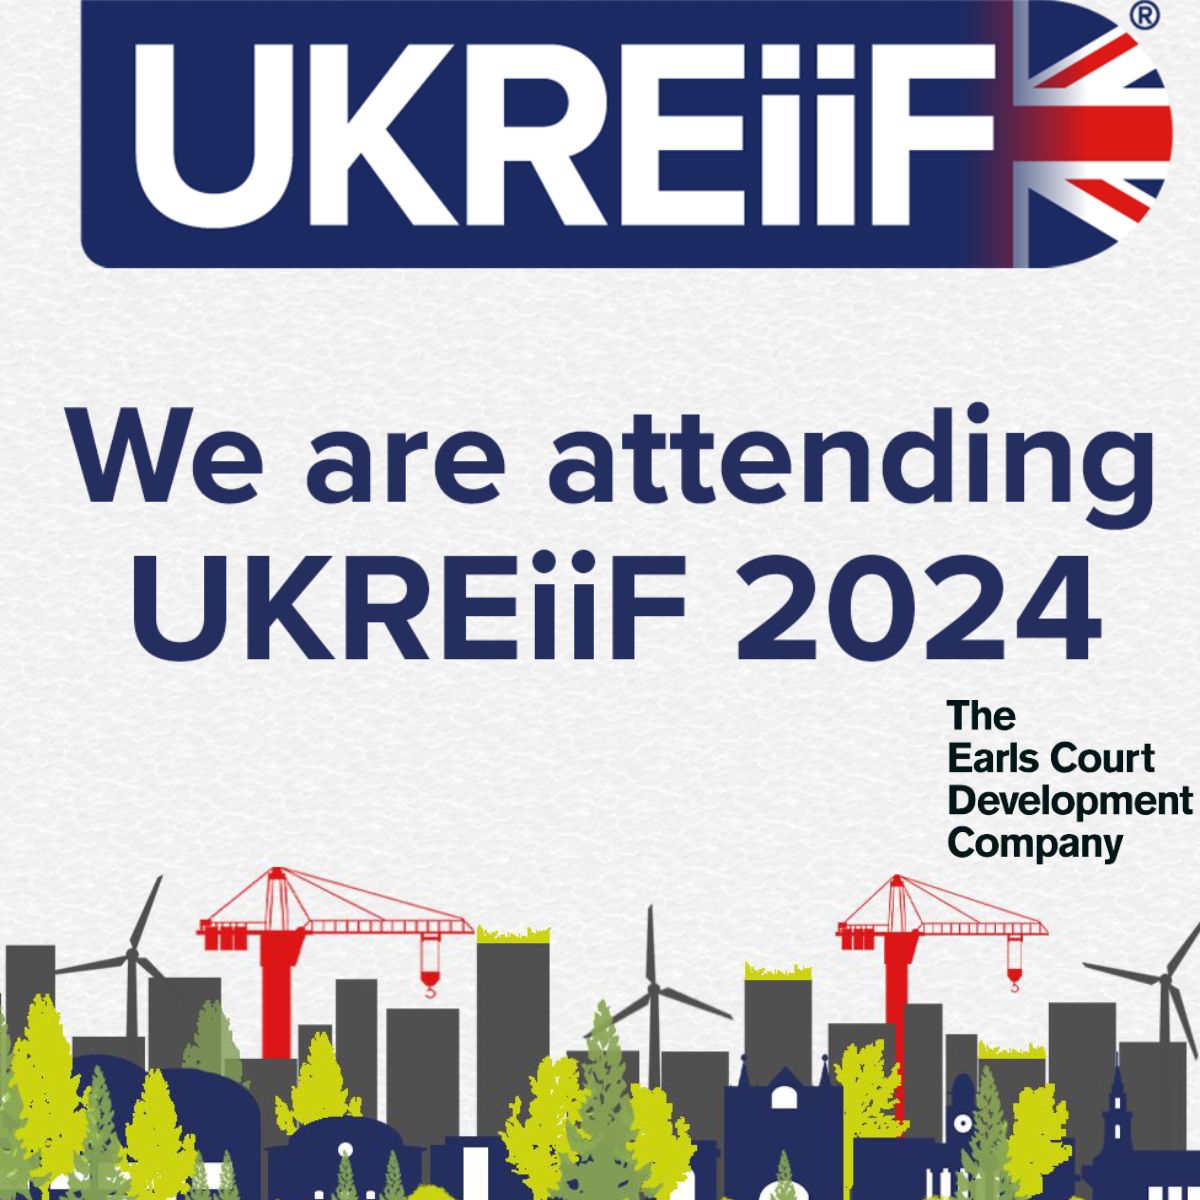 Excited to announce that members of our team will be featured speakers at @UKREiif 2024, the UK's premier event in real estate, property, and infrastructure. Stay tuned for updates and learn more here: ukreiif.com  

#earlscourt #uKREiiF #londonrealestate #property